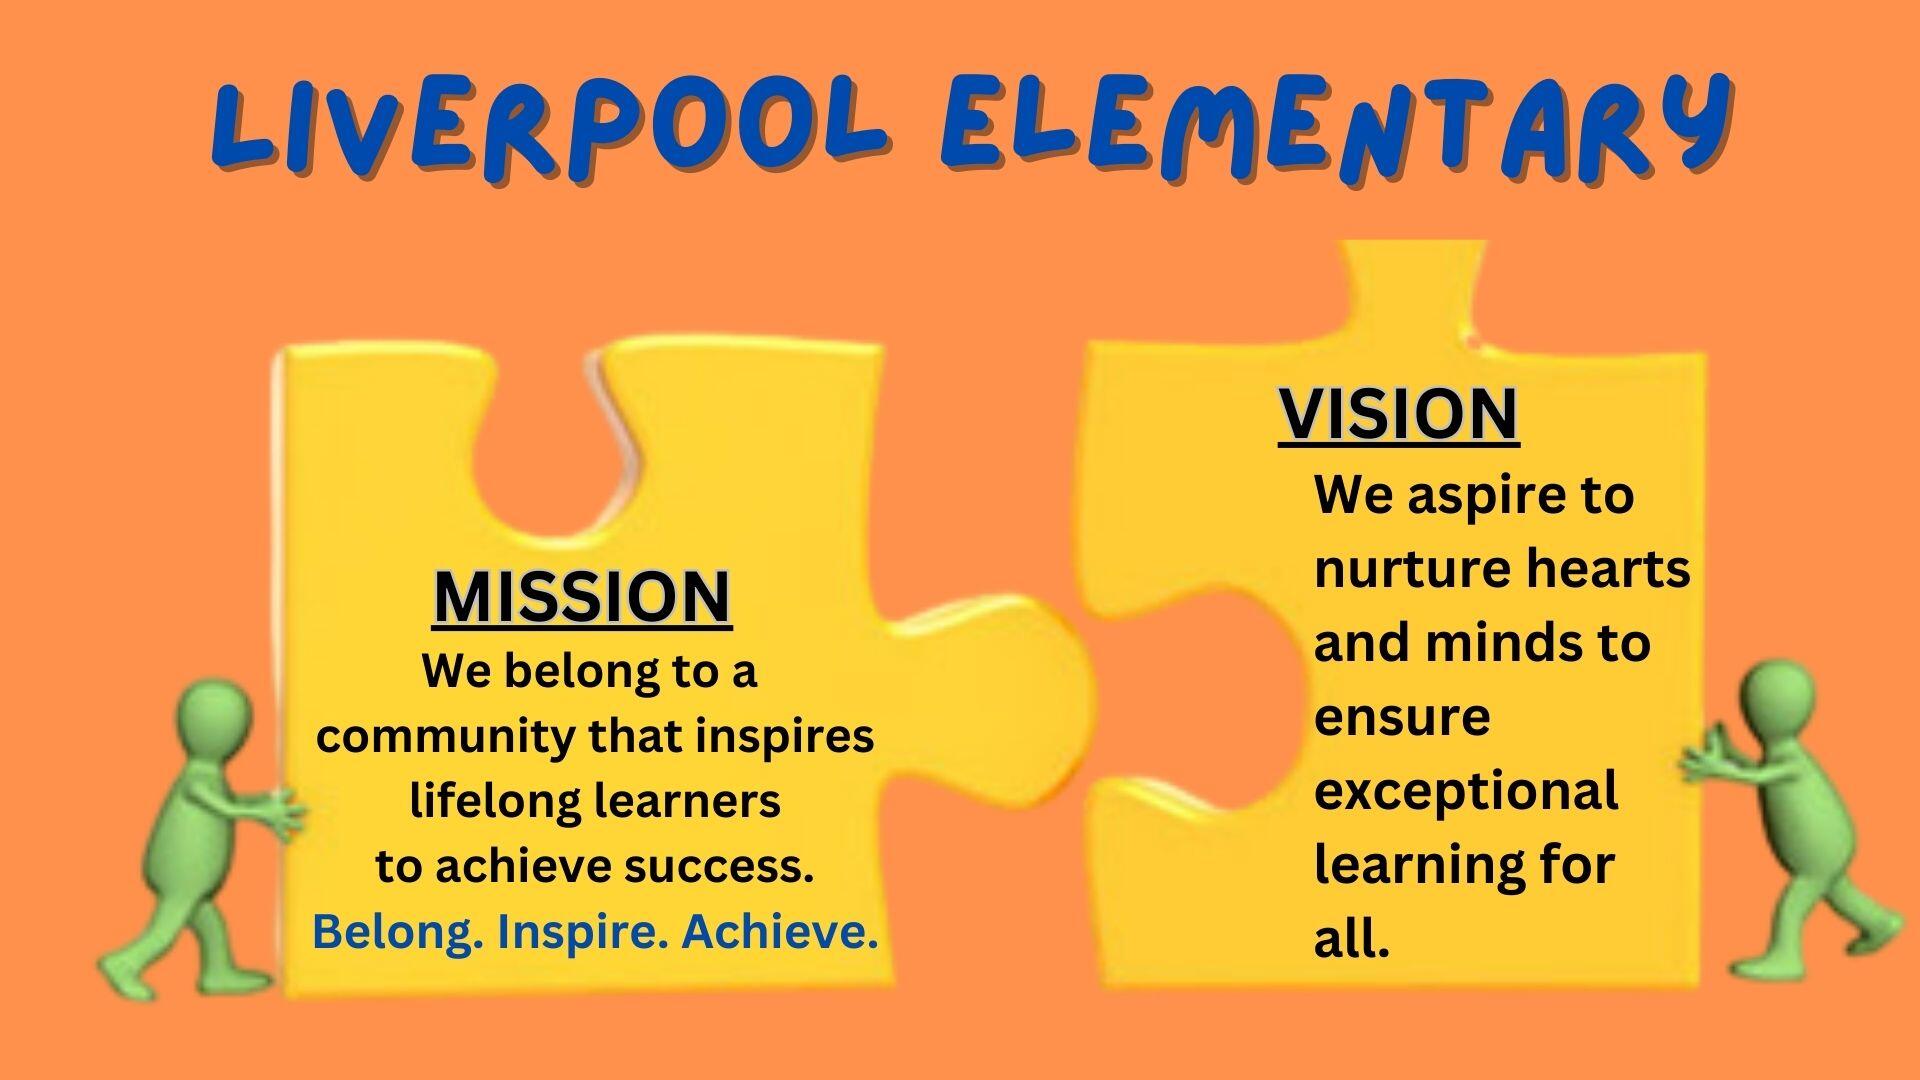 Liverpool Elementary Mission and Vision Statement